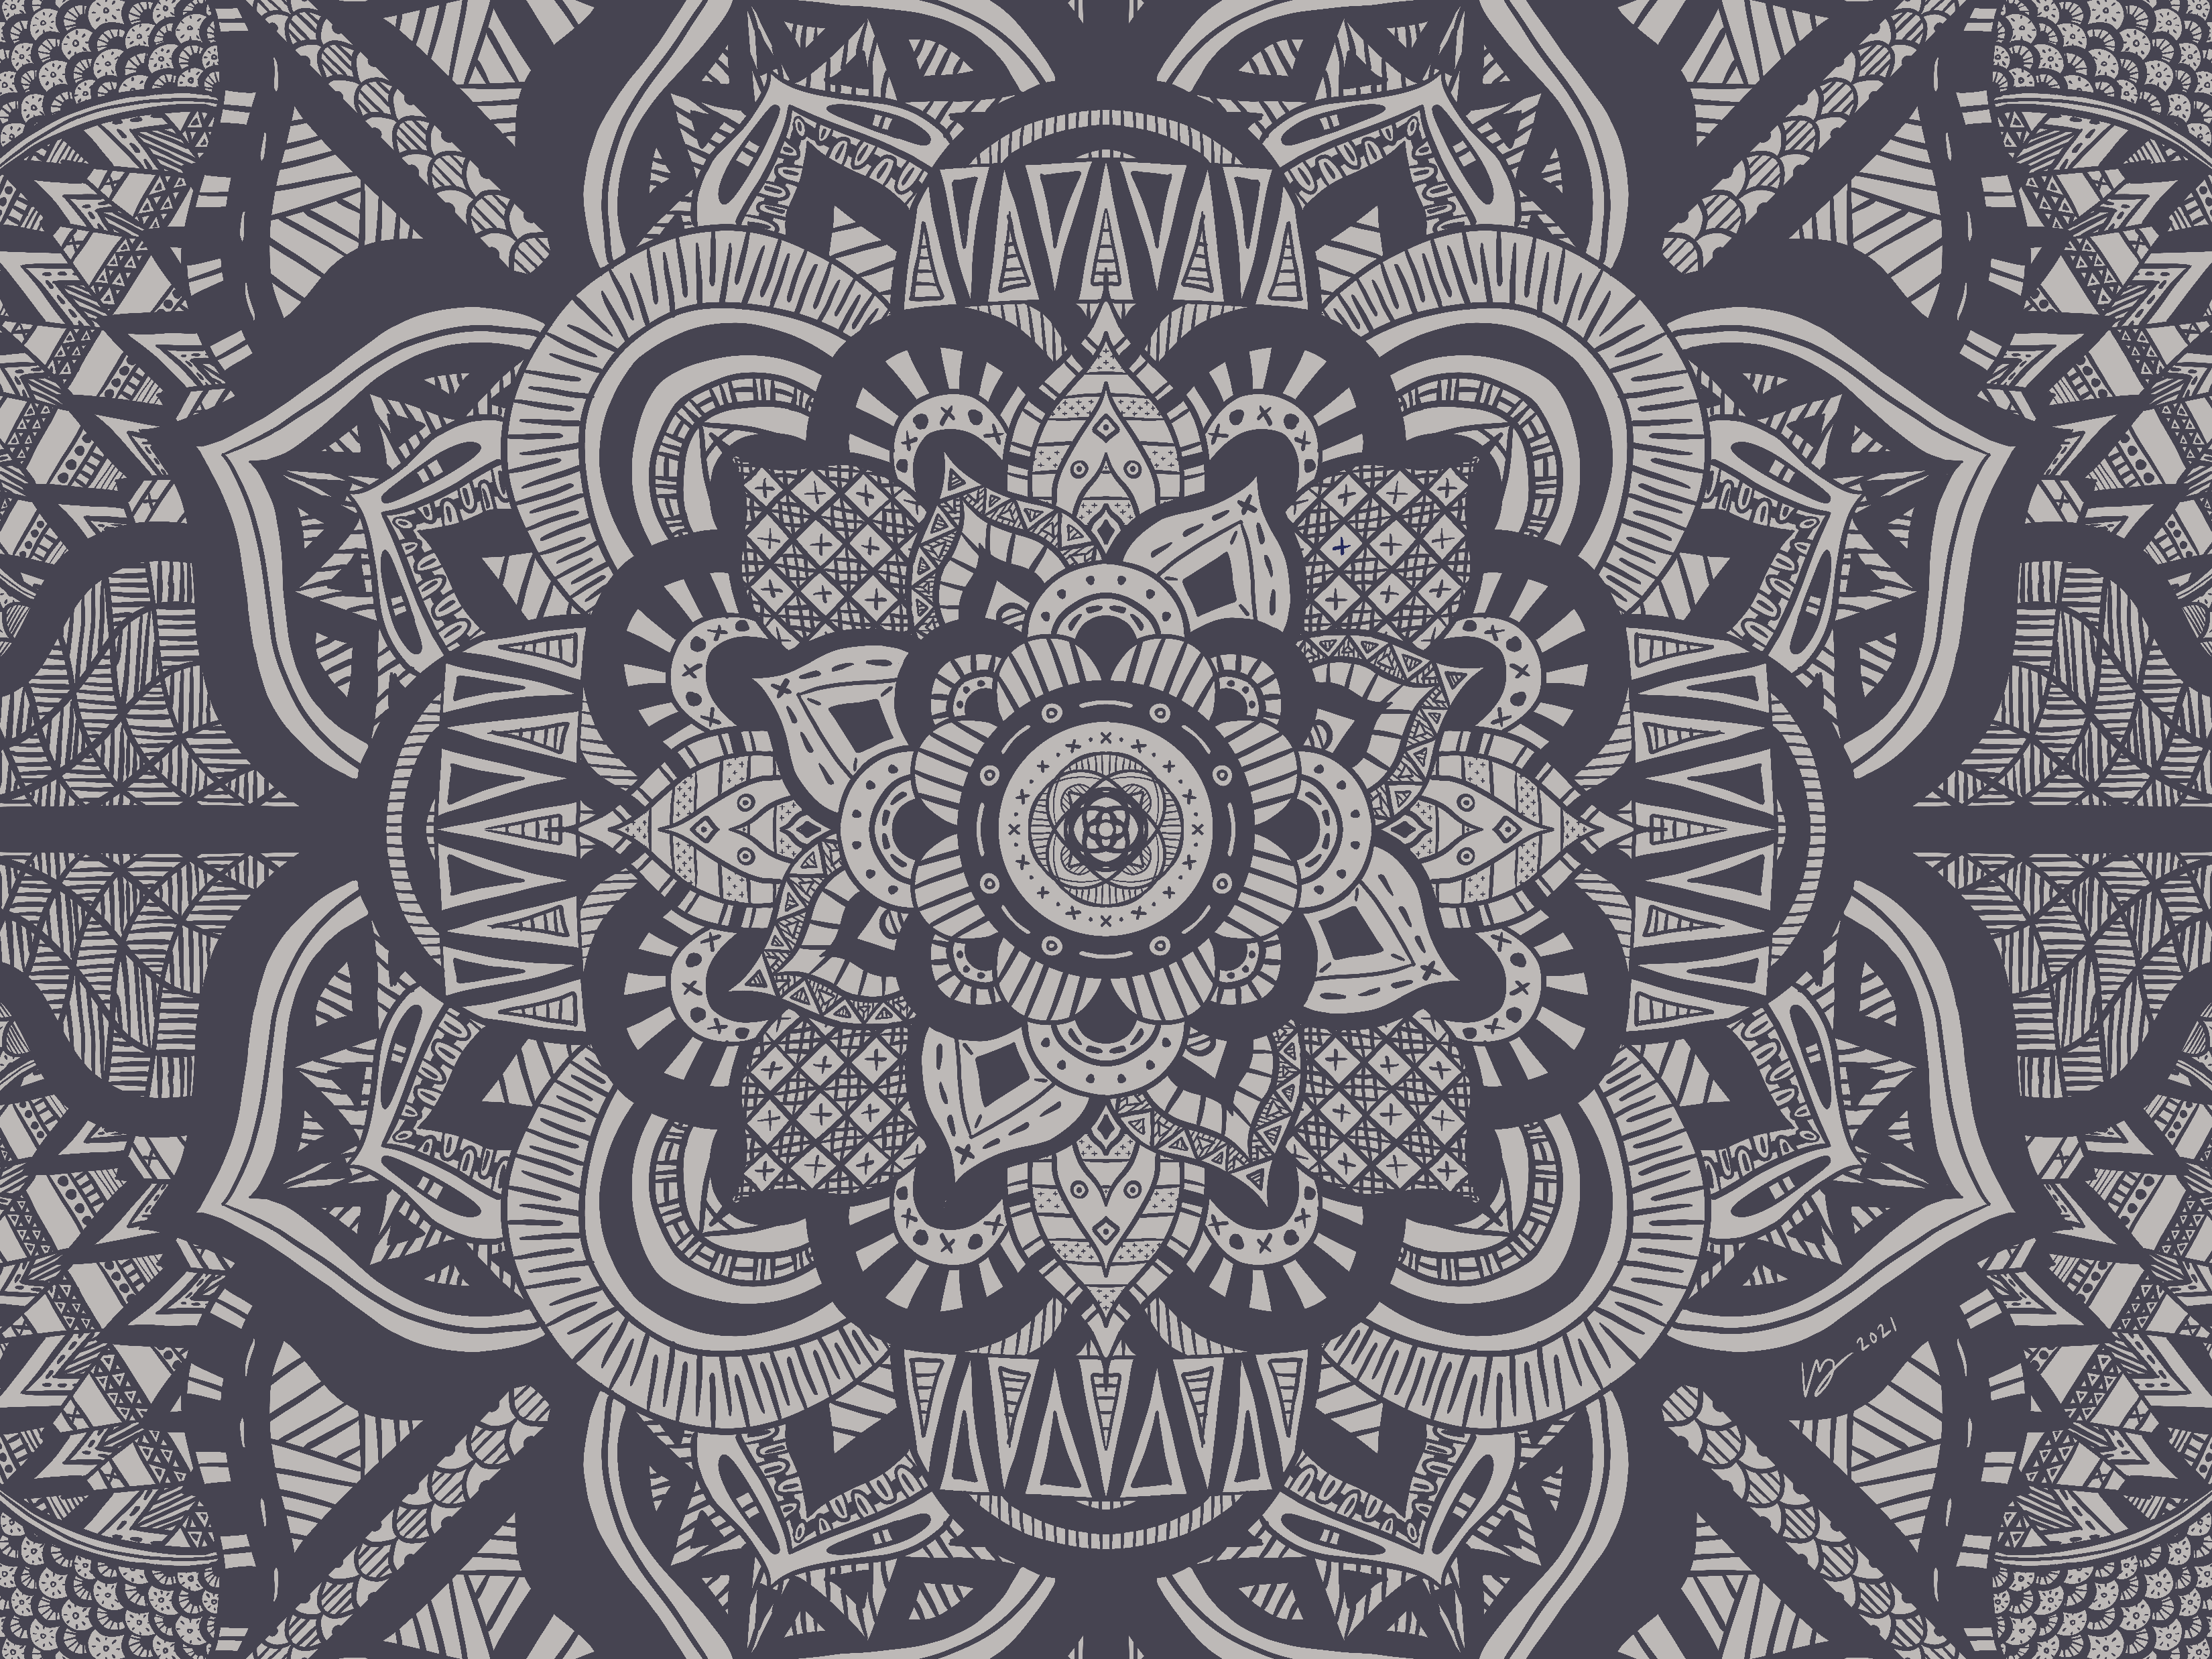 Illustration of intricate symmetrical patterns and shapes